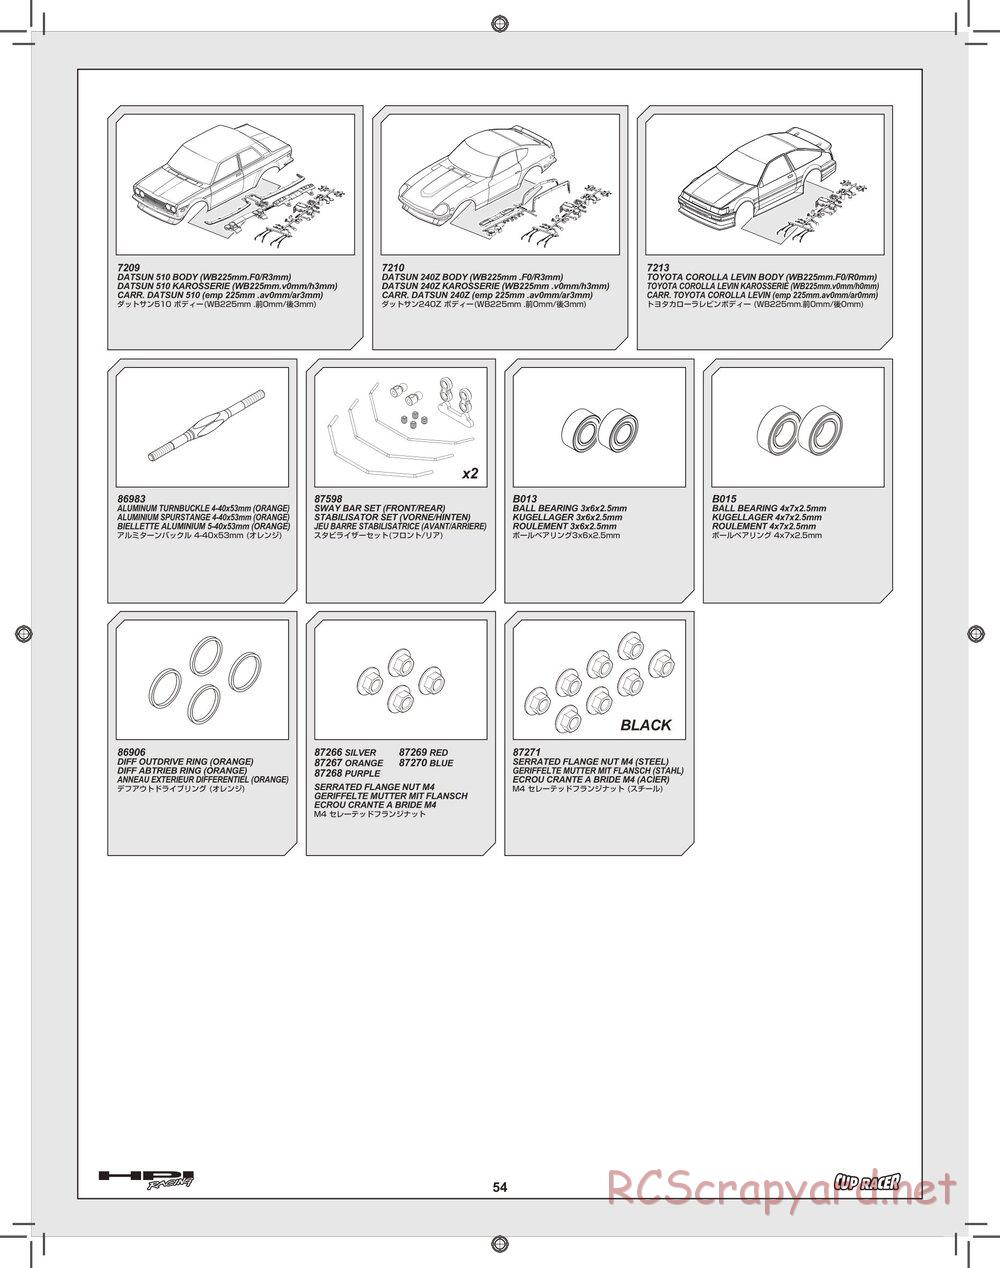 HPI - Cup Racer - Manual - Page 54